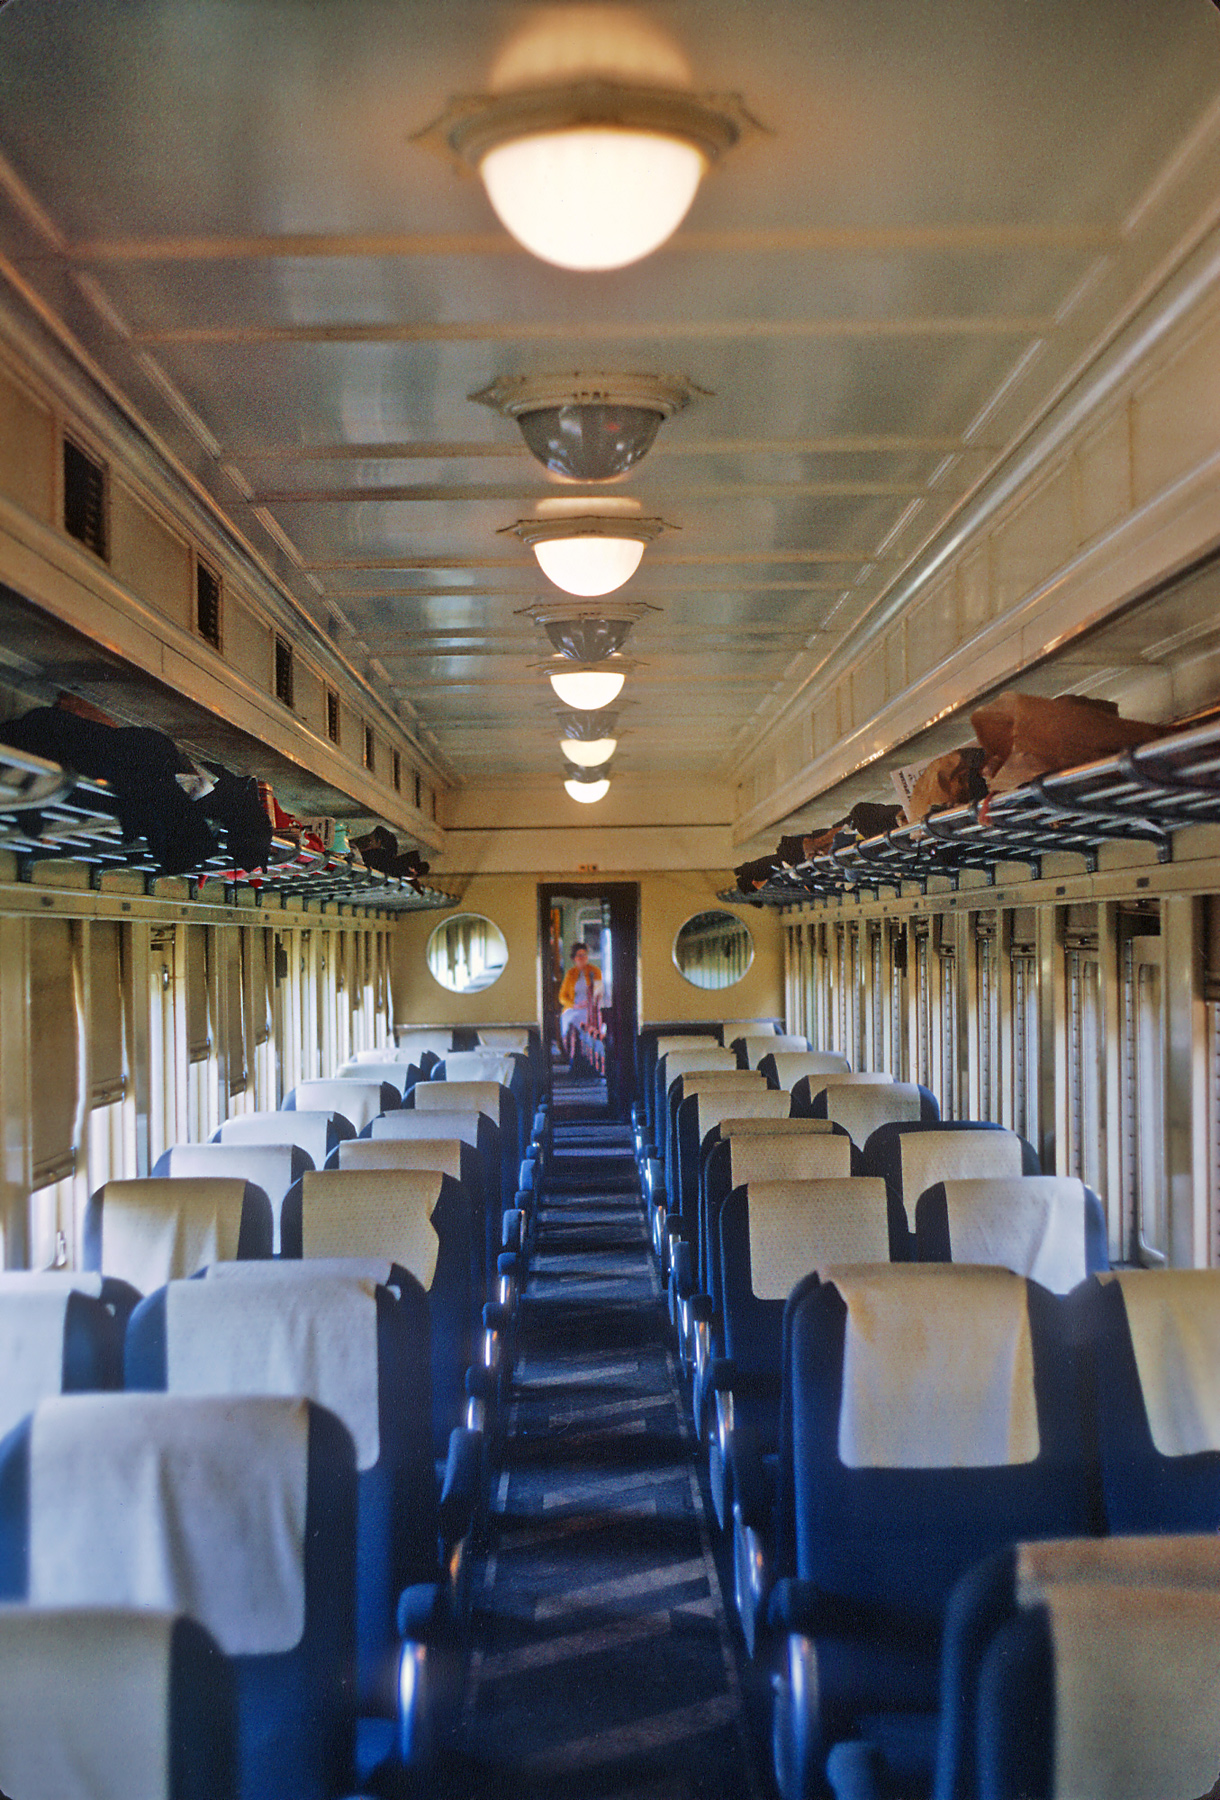 Coach Cars (Trains): Pictures, Meaning, History